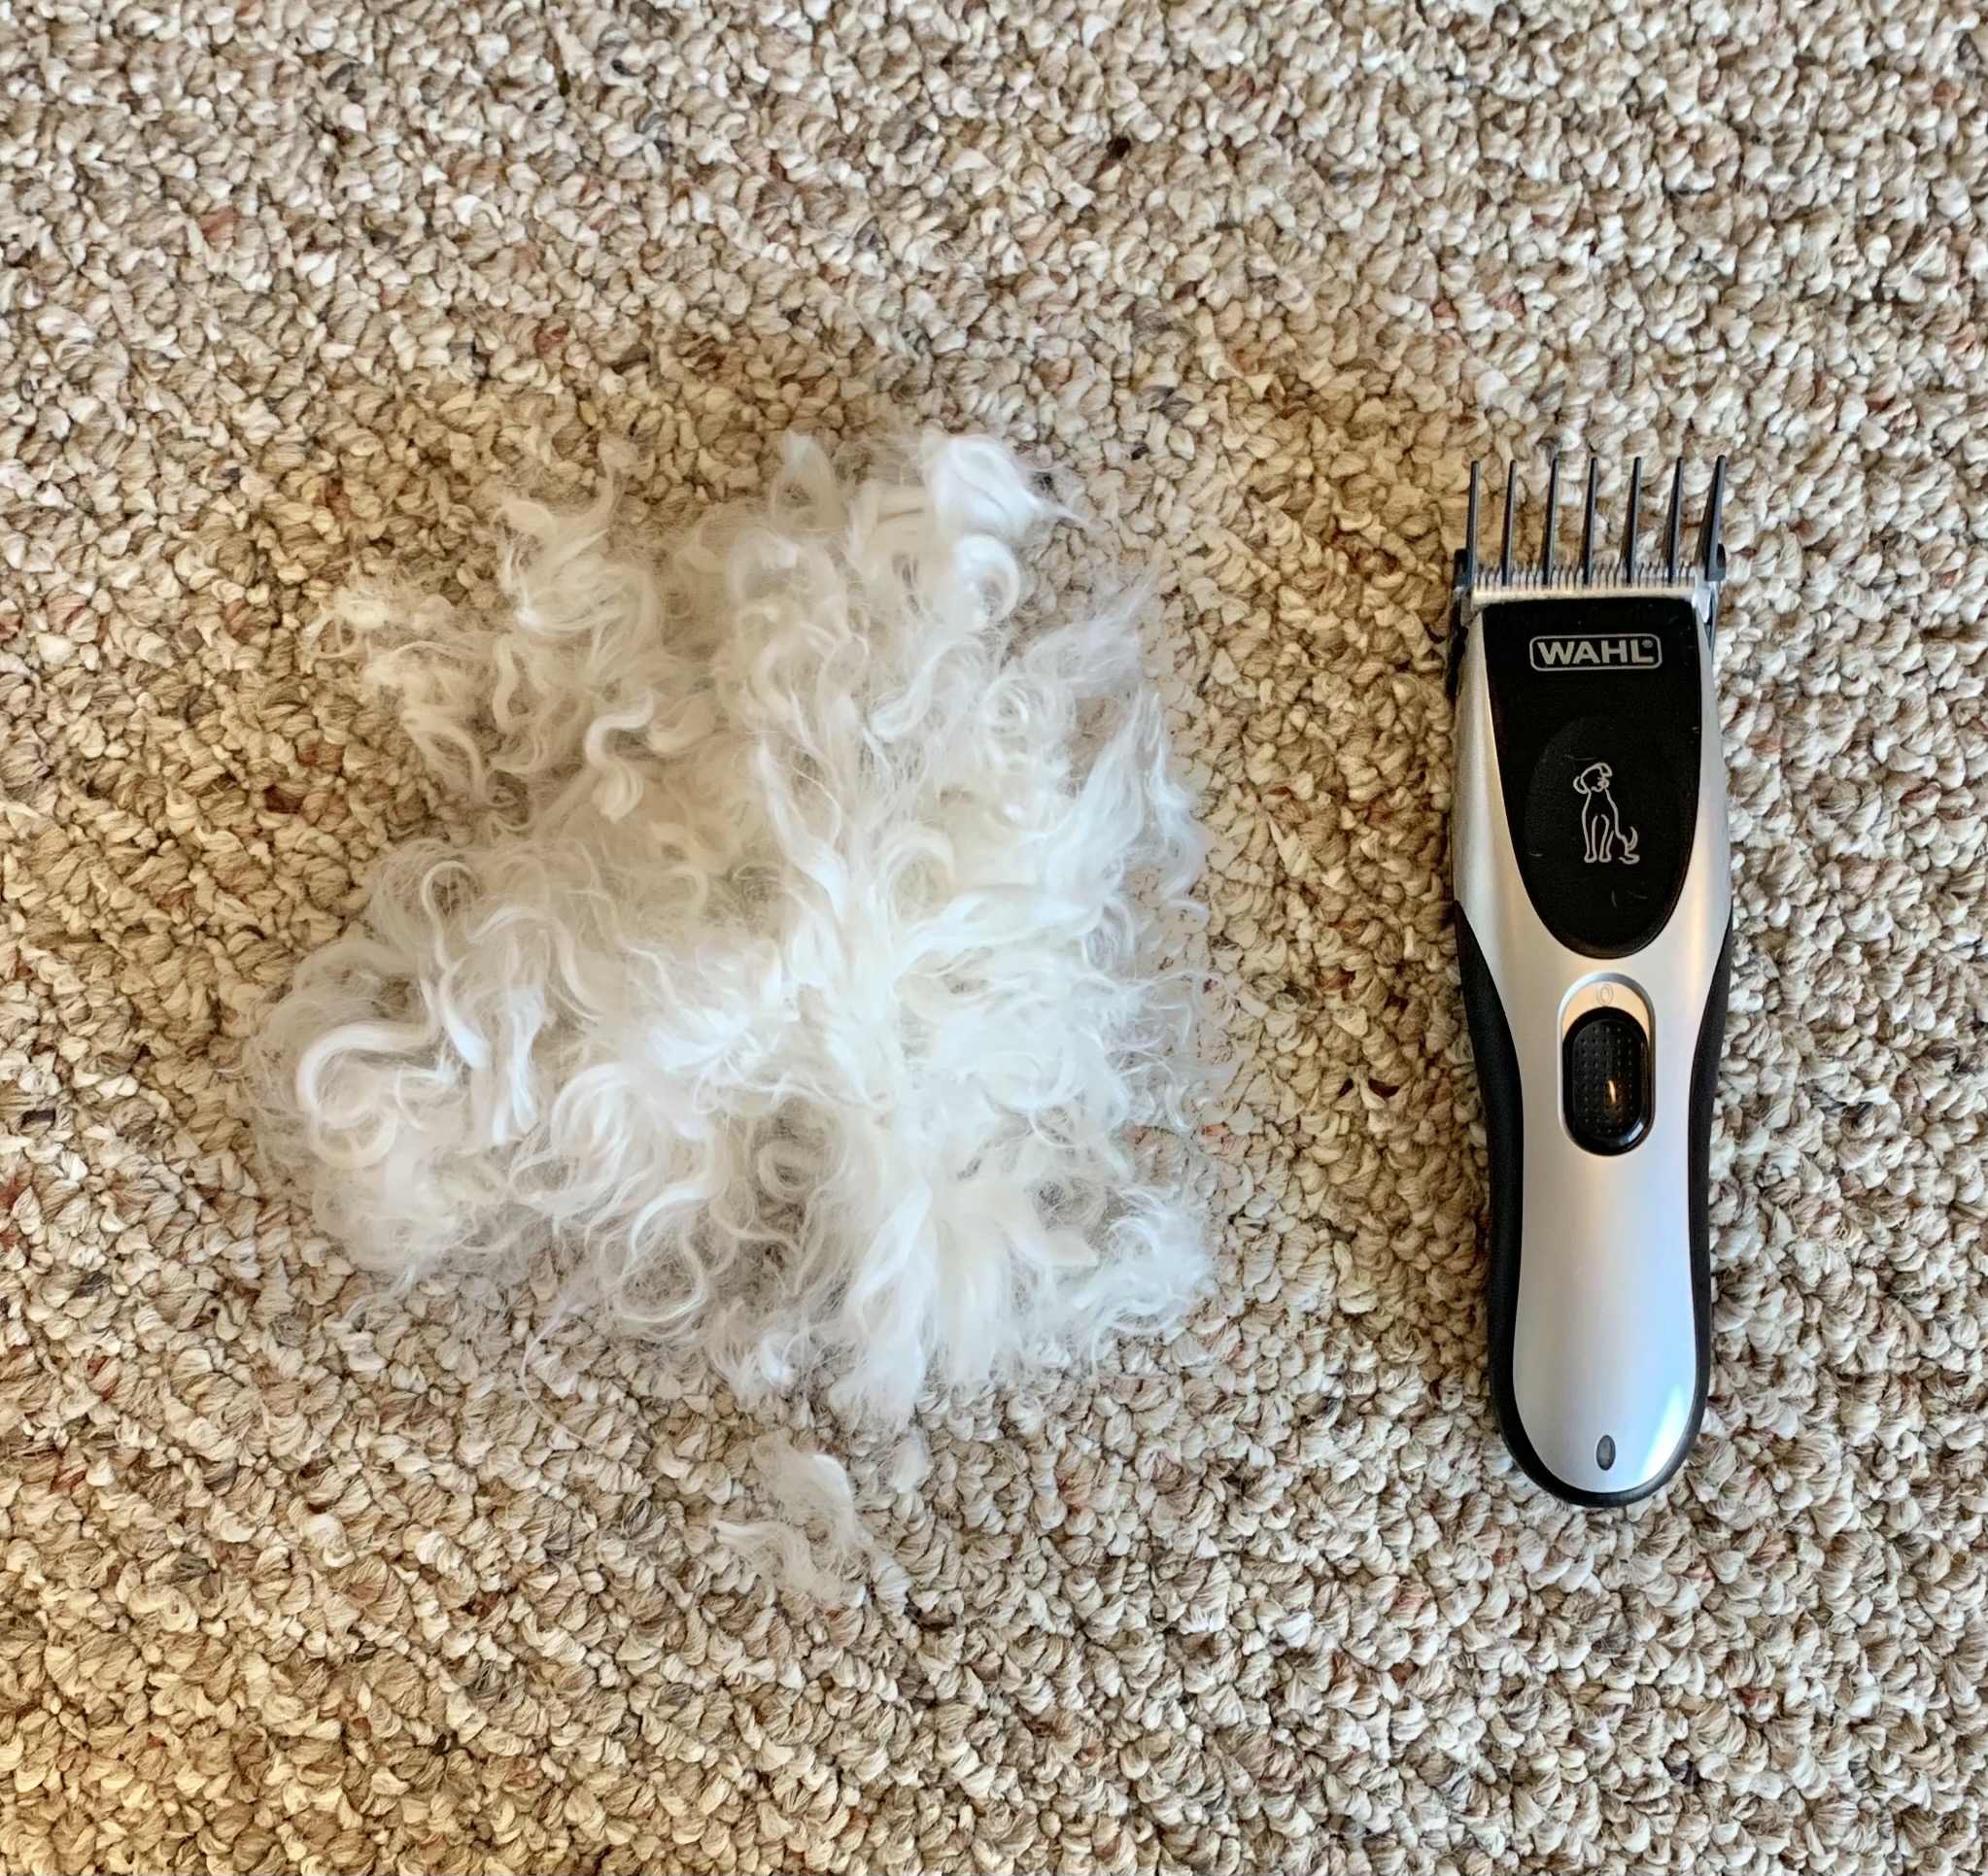 Photo of dog clippers on carpet next to a pile of shaved dog hair